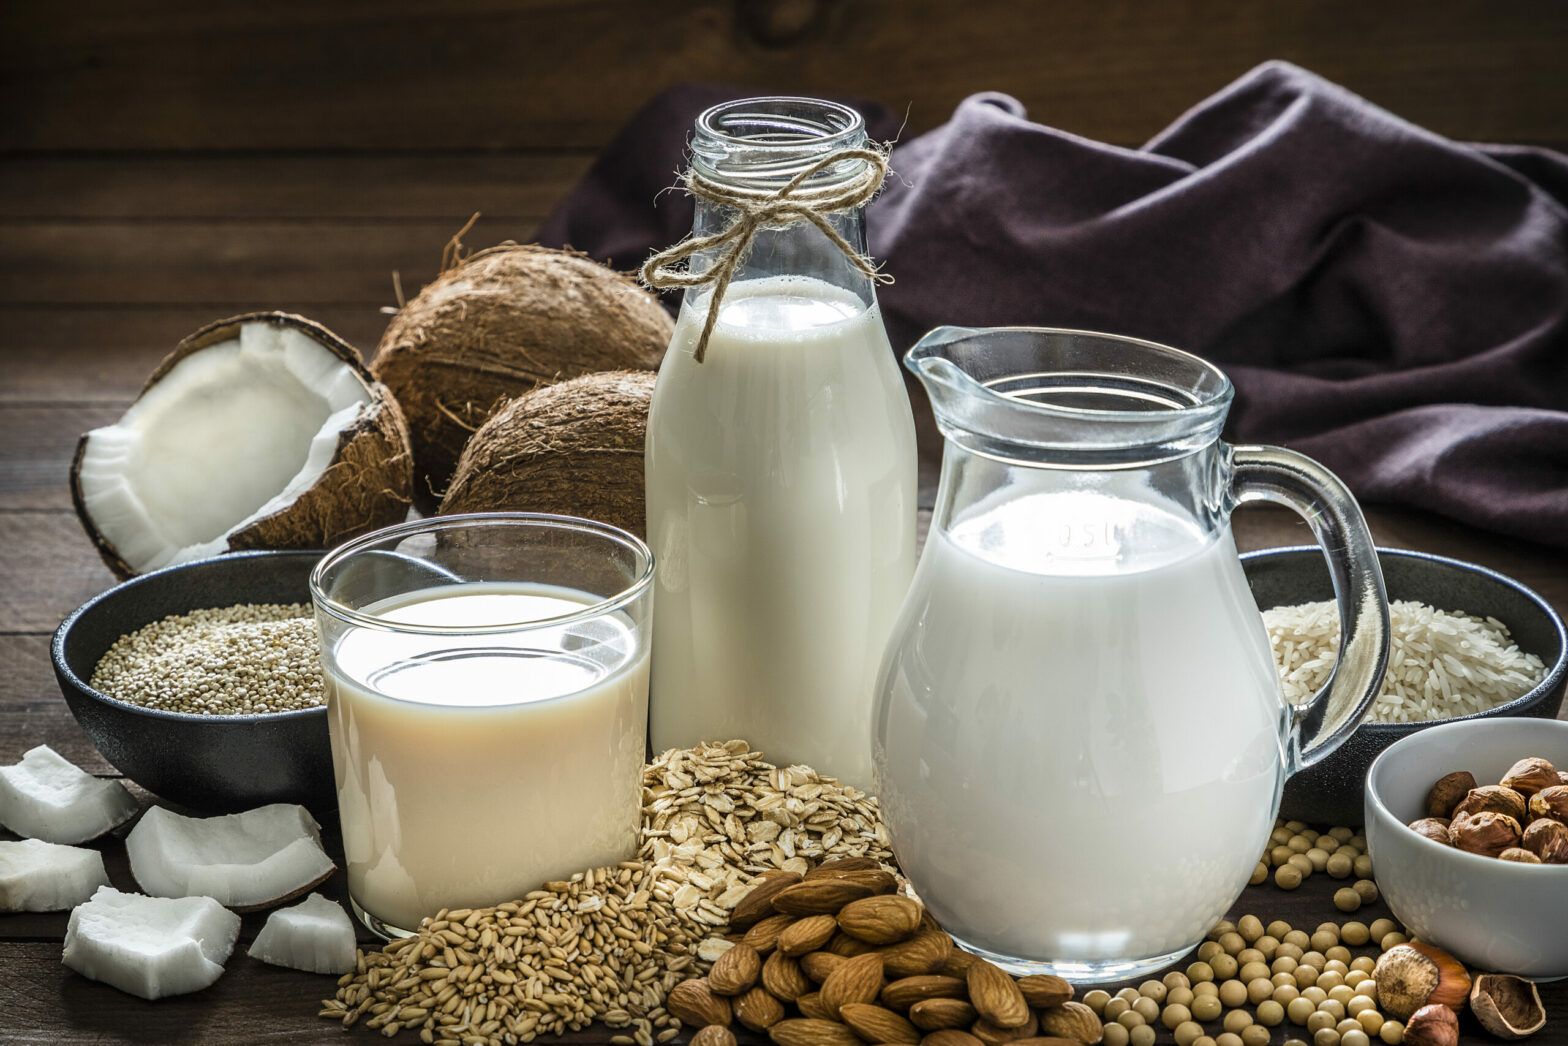 Cream of the crop: The role of milk alternatives in sustainable investing